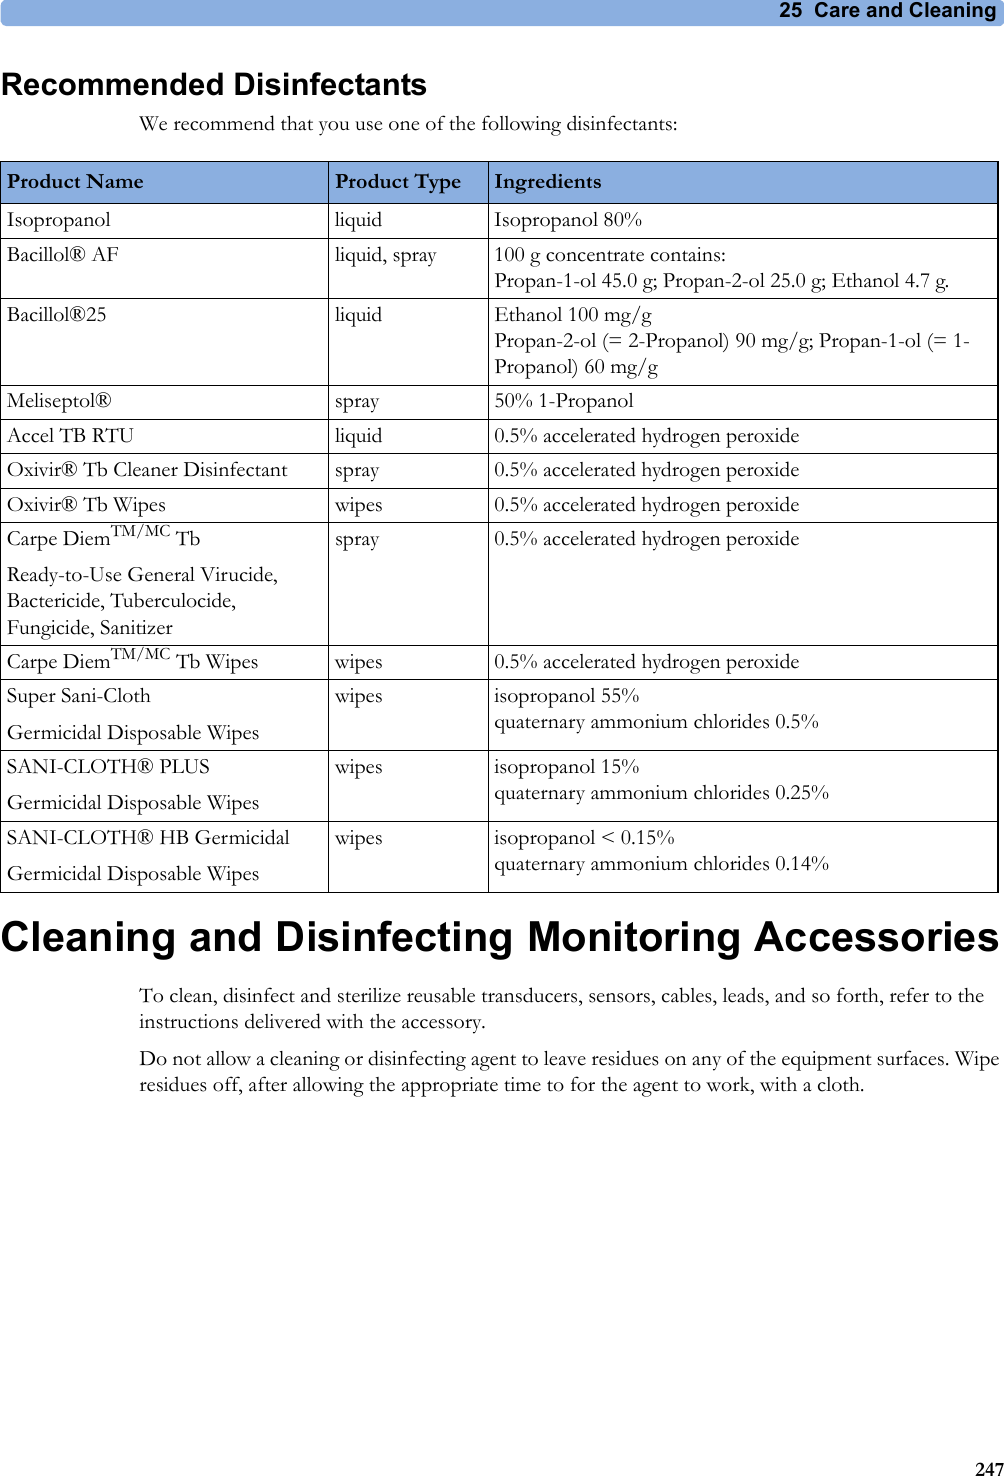 25 Care and Cleaning247Recommended DisinfectantsWe recommend that you use one of the following disinfectants:Cleaning and Disinfecting Monitoring AccessoriesTo clean, disinfect and sterilize reusable transducers, sensors, cables, leads, and so forth, refer to the instructions delivered with the accessory.Do not allow a cleaning or disinfecting agent to leave residues on any of the equipment surfaces. Wipe residues off, after allowing the appropriate time to for the agent to work, with a cloth.Product Name Product Type IngredientsIsopropanol liquid Isopropanol 80%Bacillol® AF liquid, spray 100 g concentrate contains:Propan-1-ol 45.0 g; Propan-2-ol 25.0 g; Ethanol 4.7 g.Bacillol®25 liquid Ethanol 100 mg/gPropan-2-ol (= 2-Propanol) 90 mg/g; Propan-1-ol (= 1-Propanol) 60 mg/gMeliseptol® spray 50% 1-PropanolAccel TB RTU liquid 0.5% accelerated hydrogen peroxideOxivir® Tb Cleaner Disinfectant spray 0.5% accelerated hydrogen peroxideOxivir® Tb Wipes wipes 0.5% accelerated hydrogen peroxideCarpe DiemTM/MC TbReady-to-Use General Virucide, Bactericide, Tuberculocide, Fungicide, Sanitizerspray 0.5% accelerated hydrogen peroxideCarpe DiemTM/MC Tb Wipes wipes 0.5% accelerated hydrogen peroxideSuper Sani-ClothGermicidal Disposable Wipeswipes isopropanol 55%quaternary ammonium chlorides 0.5%SANI-CLOTH® PLUSGermicidal Disposable Wipeswipes isopropanol 15%quaternary ammonium chlorides 0.25%SANI-CLOTH® HB GermicidalGermicidal Disposable Wipeswipes isopropanol &lt; 0.15%quaternary ammonium chlorides 0.14%